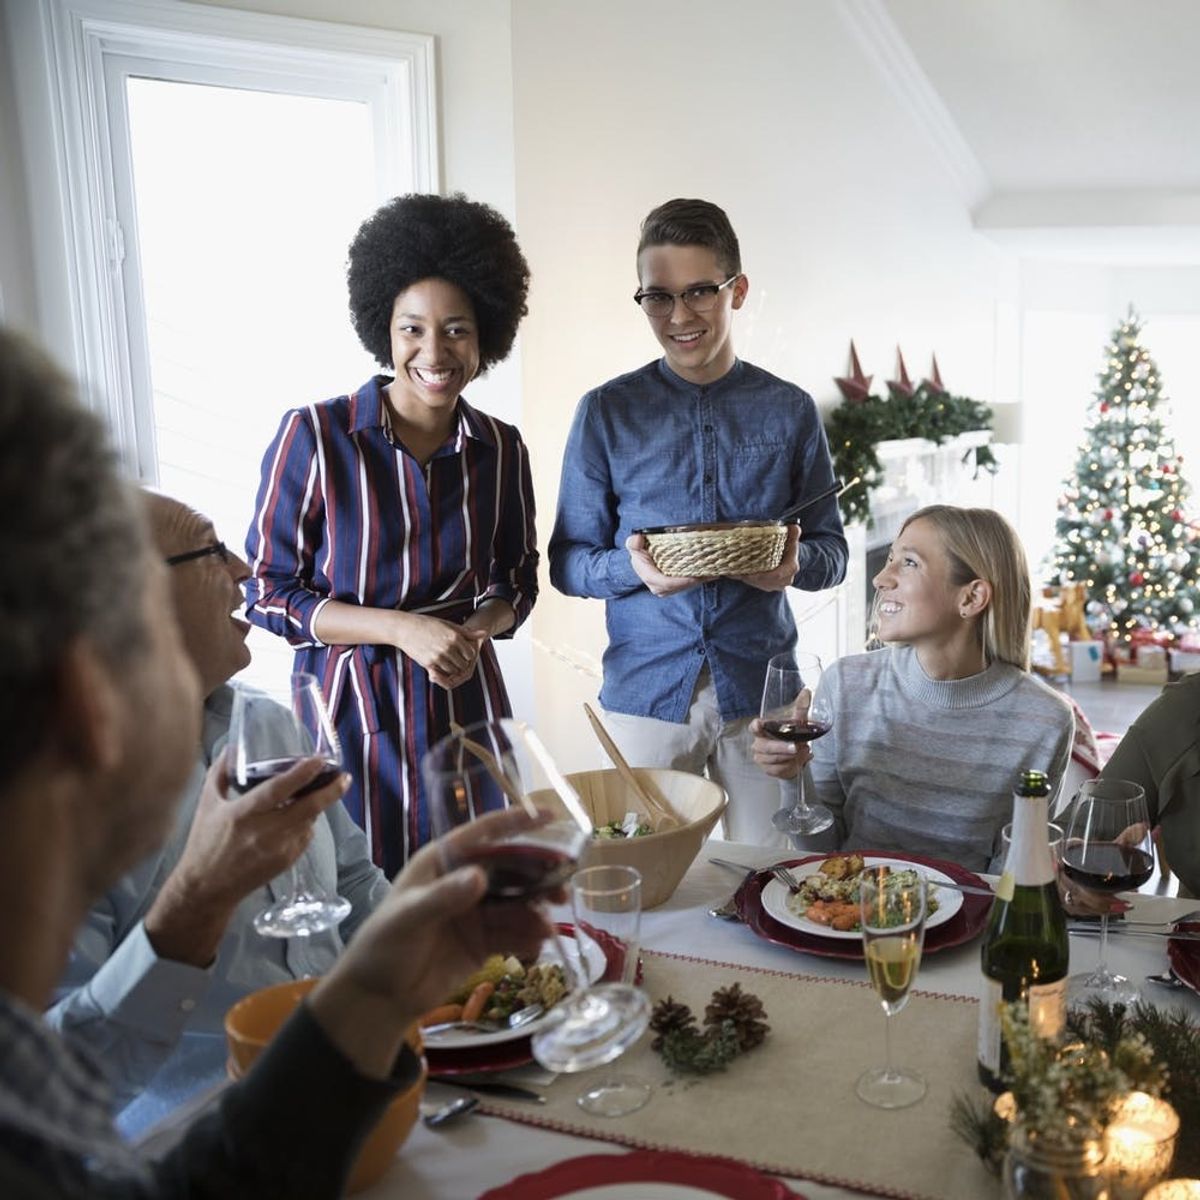 How to Survive the Holidays If You Don’t Get Along With Your Family